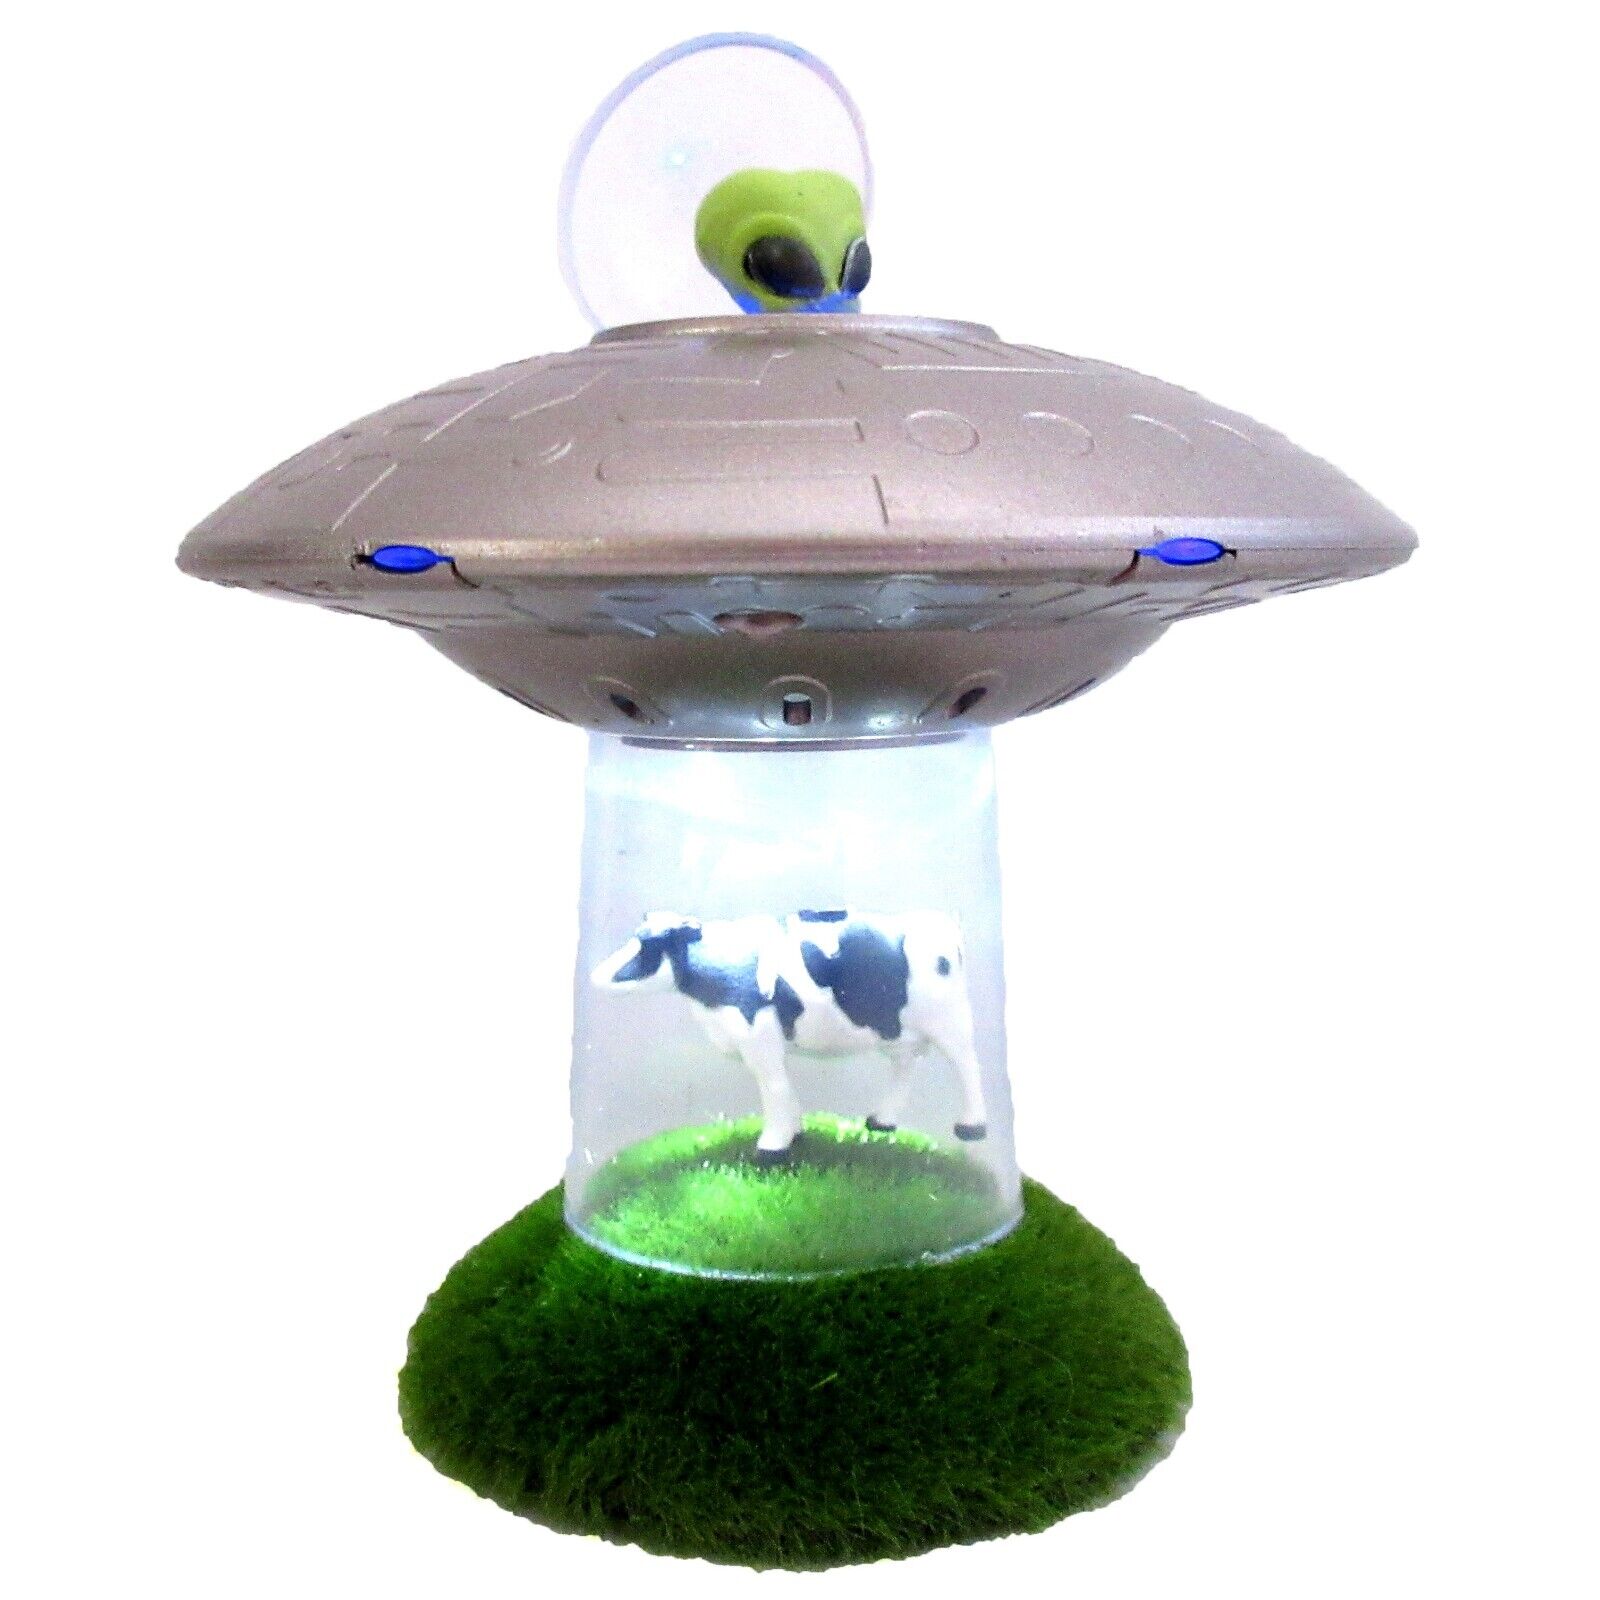 UFO Cow Abduction Light Up and Sound Toy Alien Gag Gift - MUST SEE VIDEO